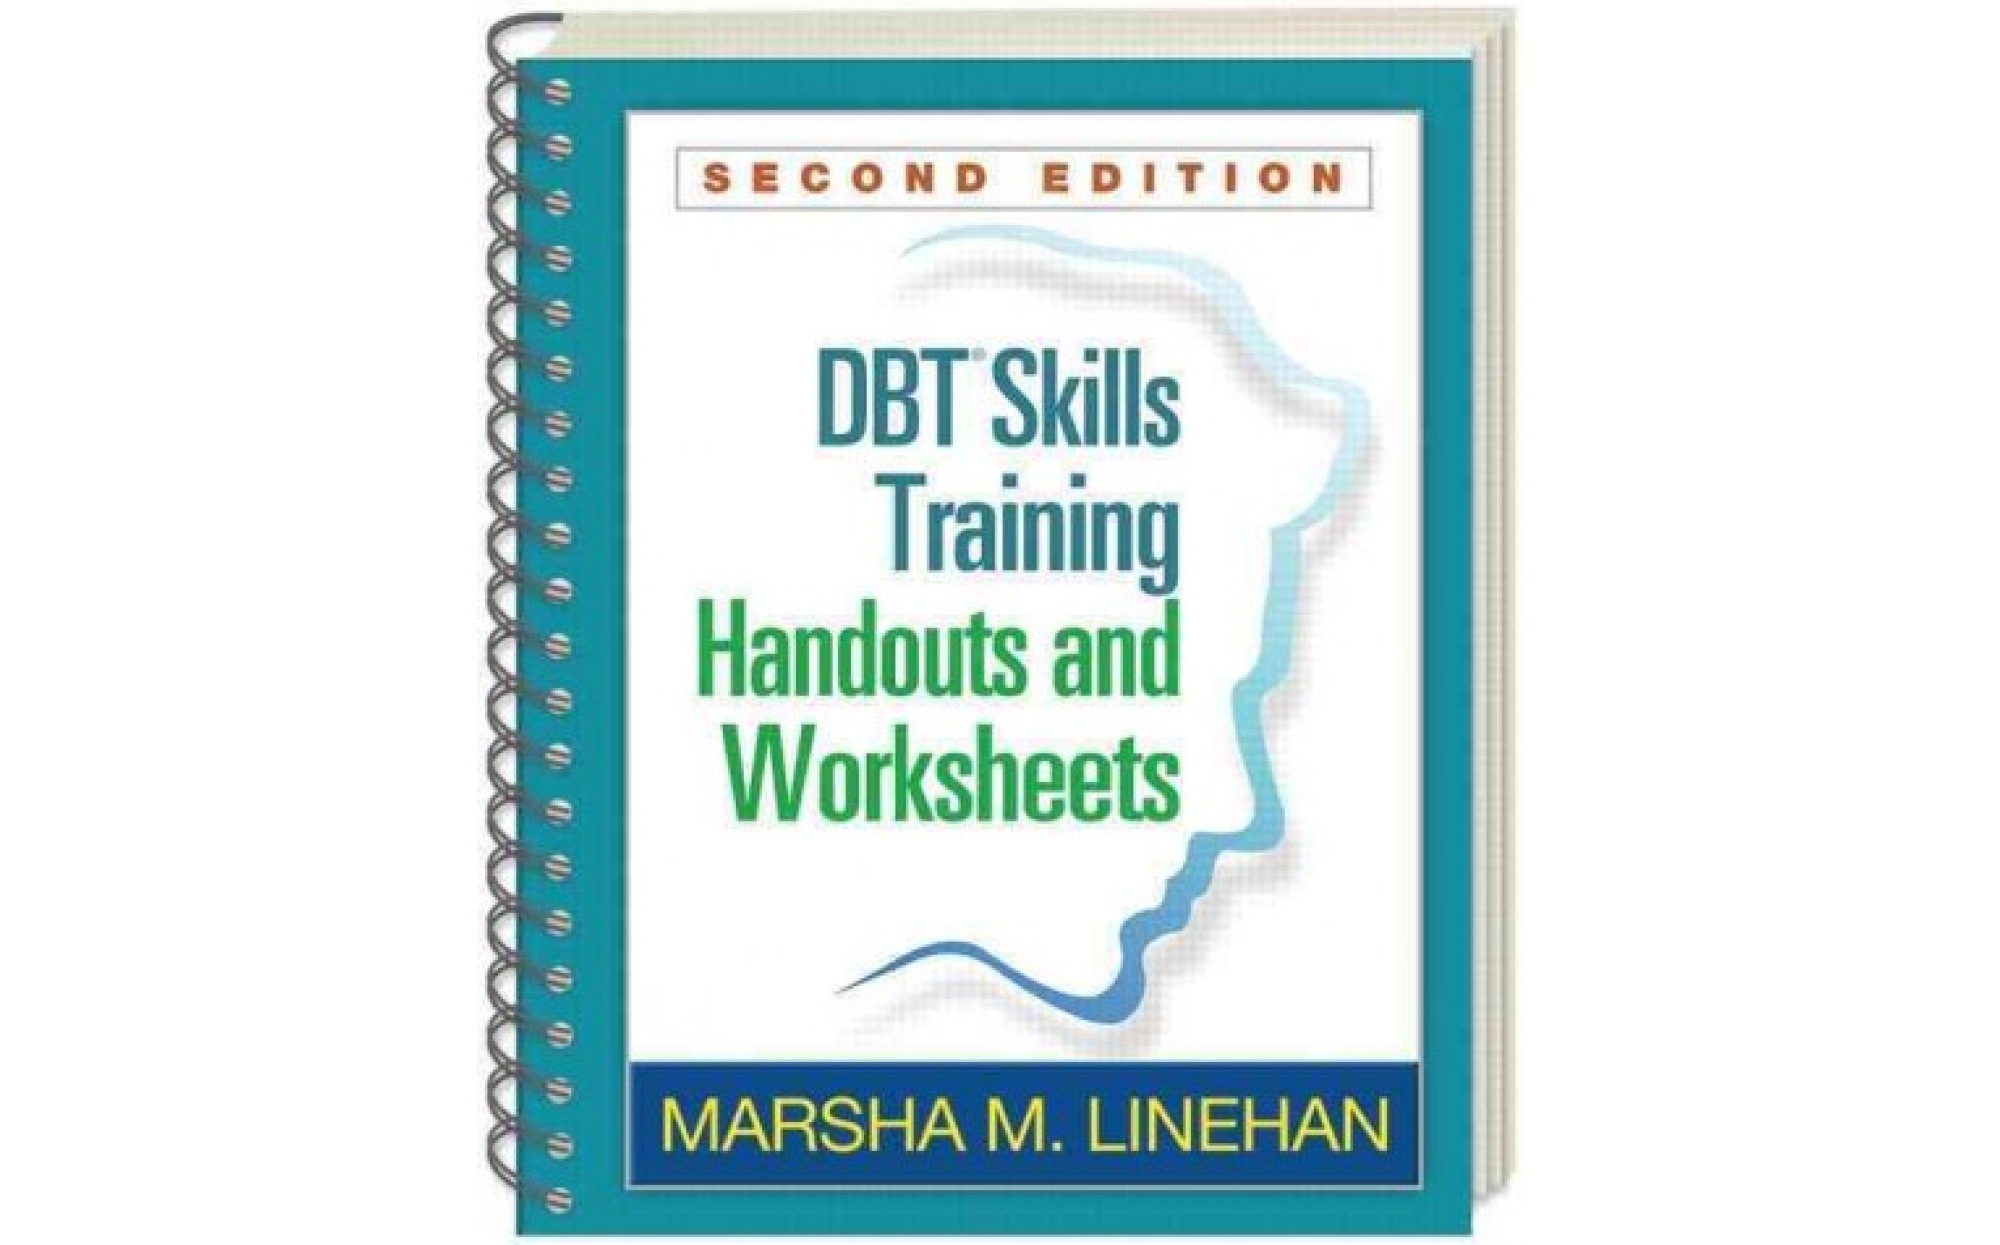 Dbt Skills And Training Handouts And Worksheets Pdf